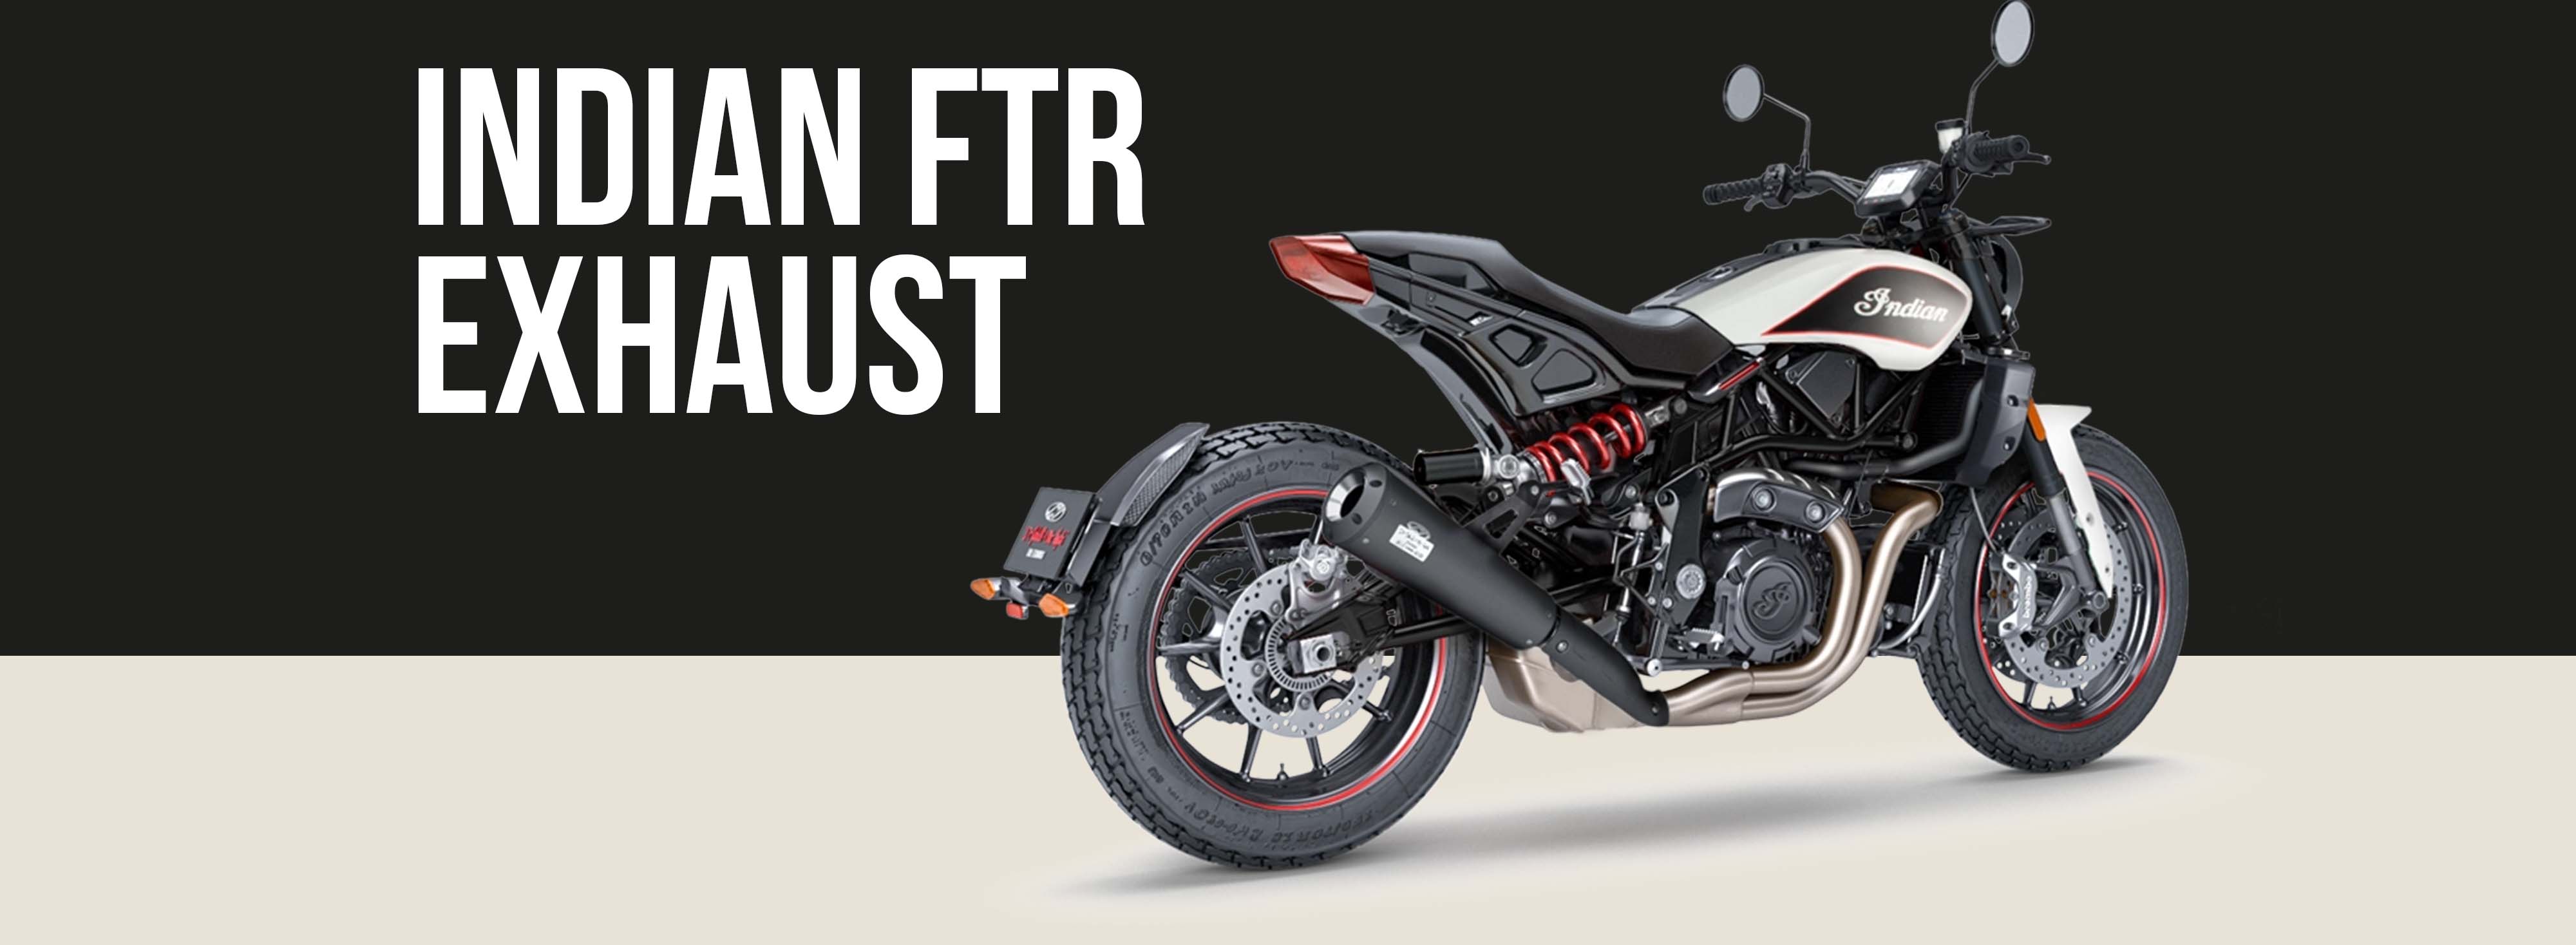 Indian FTR Motorcycle Brand Page Header